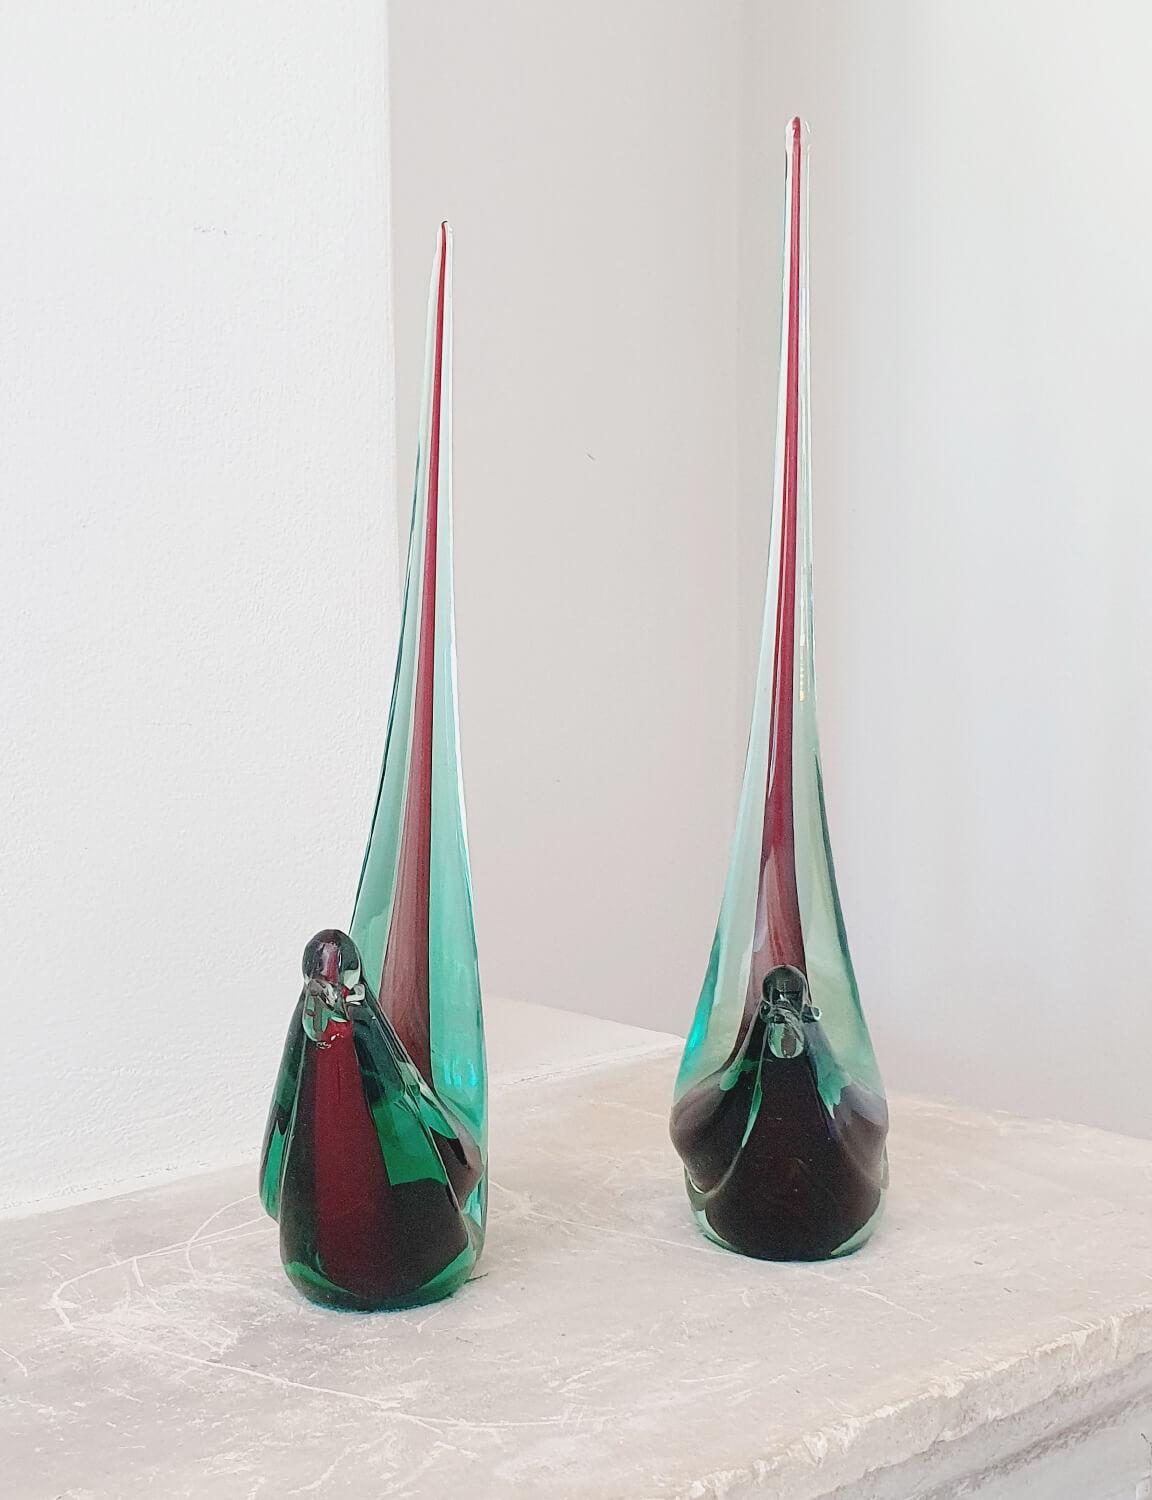 Pair of 1960s exquisite hand blown birds by the great glass designer, Cenedese. Giovanni Cenedese was a renowned glass blower in Murano in the 1950s and early 60s. He is the father of the contemporary Venetian glass blower Simone Cenedese whom he